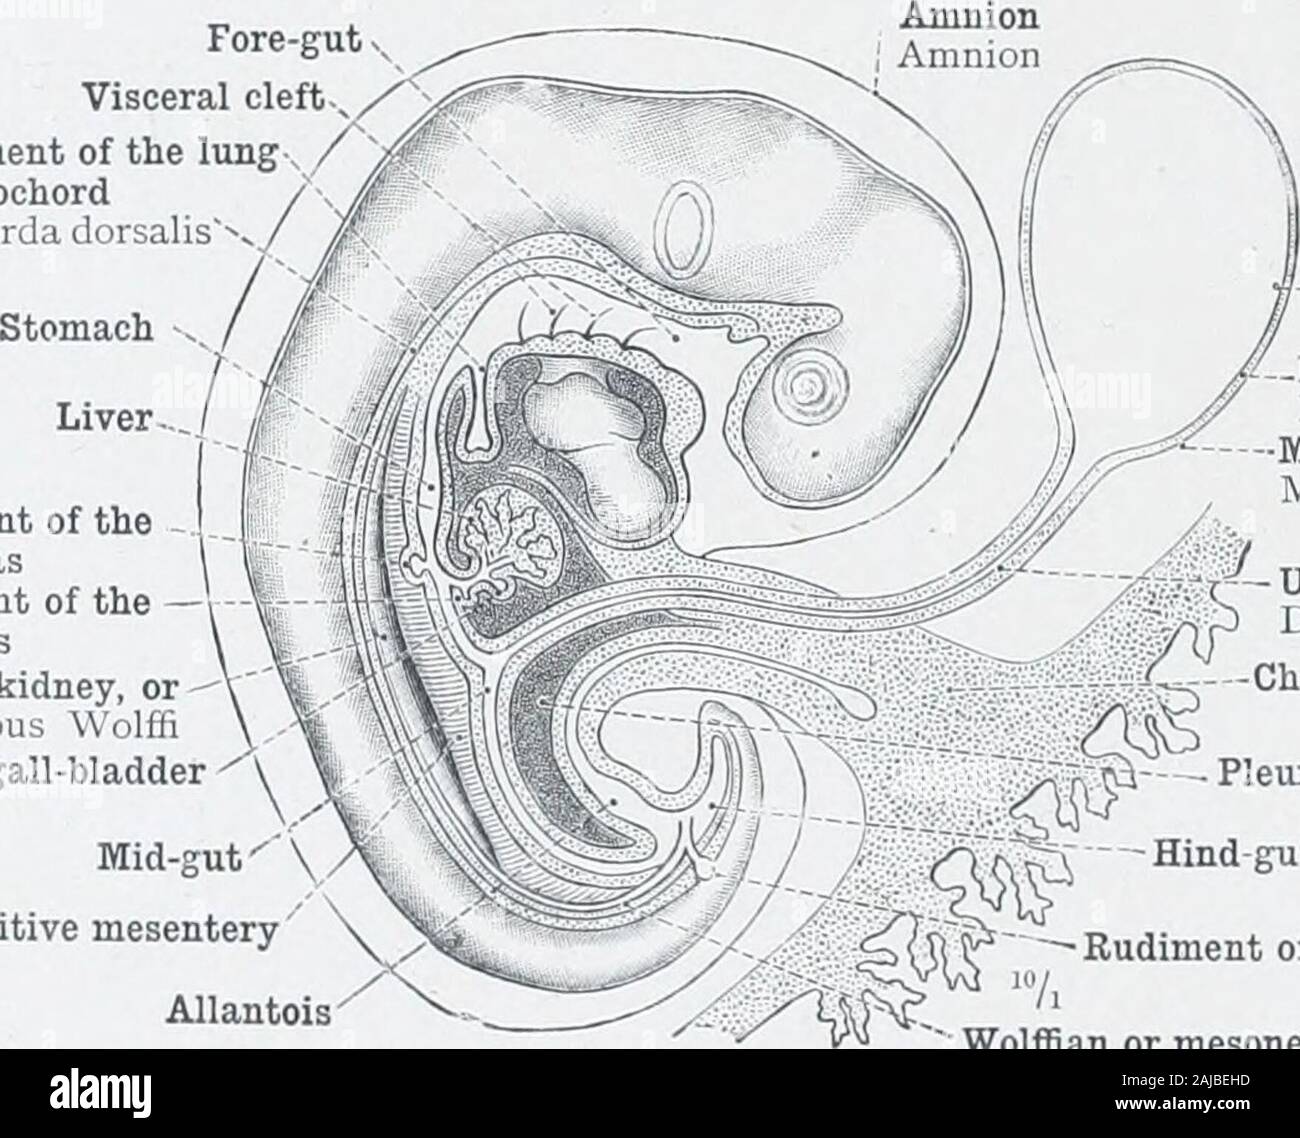 An atlas of human anatomy for students and physicians . Fig. 796.—Human Embryo in the Beginning of the Third Week (Diagrammatic). Fore-gutVisceral cleftRudiment of the lung / Notochord Cliorda dorsalis^^ Dorsal rudiment of thepancreasVentral rudiment of the —pancreasWolffian body, mid-kidney, ormesonephros—Corpus WolffiRudiment of the gall-bladder. Mid-gut^ Primitive mesentery Allantois Umbilical vesicle Vesicula umbilicalisHypoblastEntoderm-MesoblastMesoderm - Umbilical or vitelline duct Ductus omphalo-entericus &gt; -- -Chorion M- - - Pleuroperitoneal cavityVi^ (coelom) (S ^ —Rudiment of Stock Photo